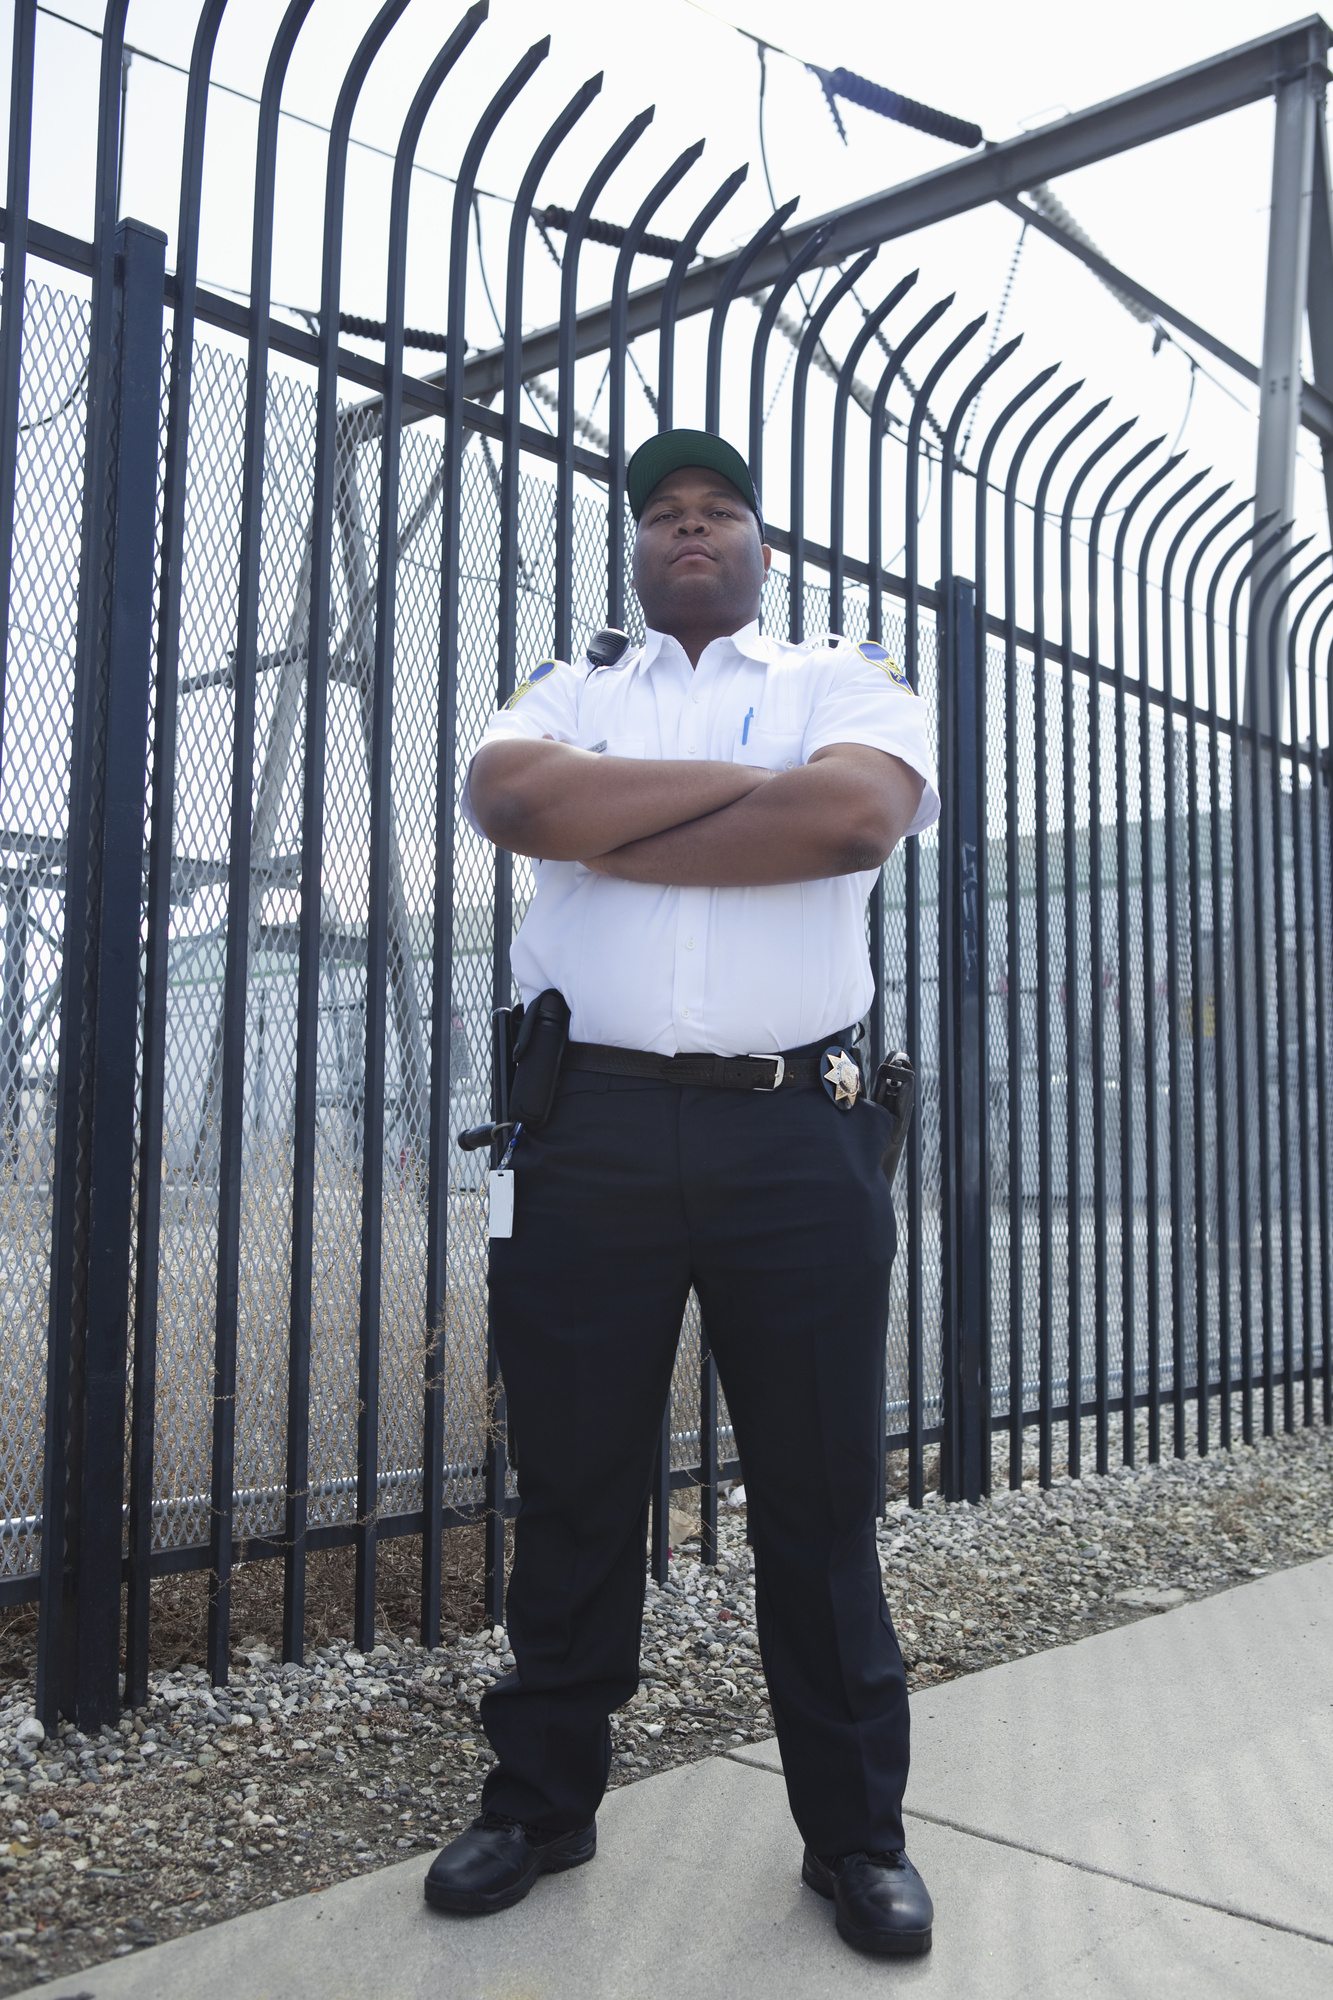 Primary Responsibilities Of A Security Guard Security Industry News